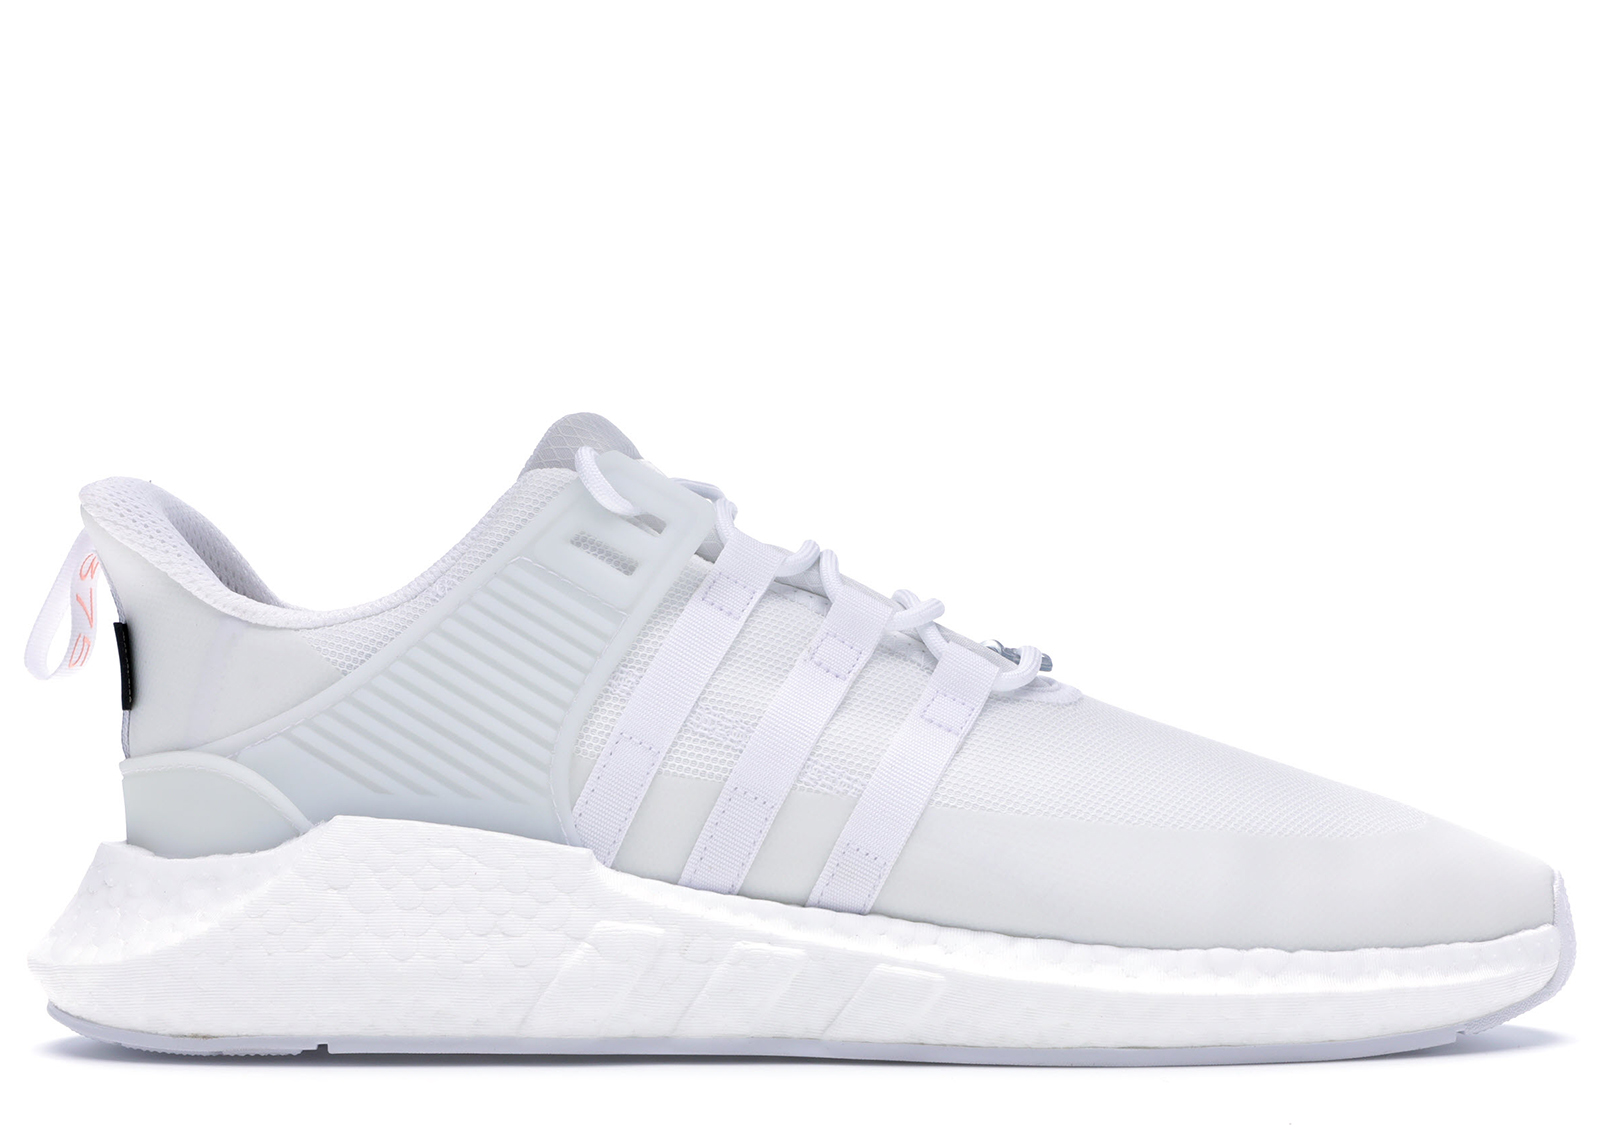 adidas EQT Support 93/17 Gore-tex Reflect & Protect (White) Men's 